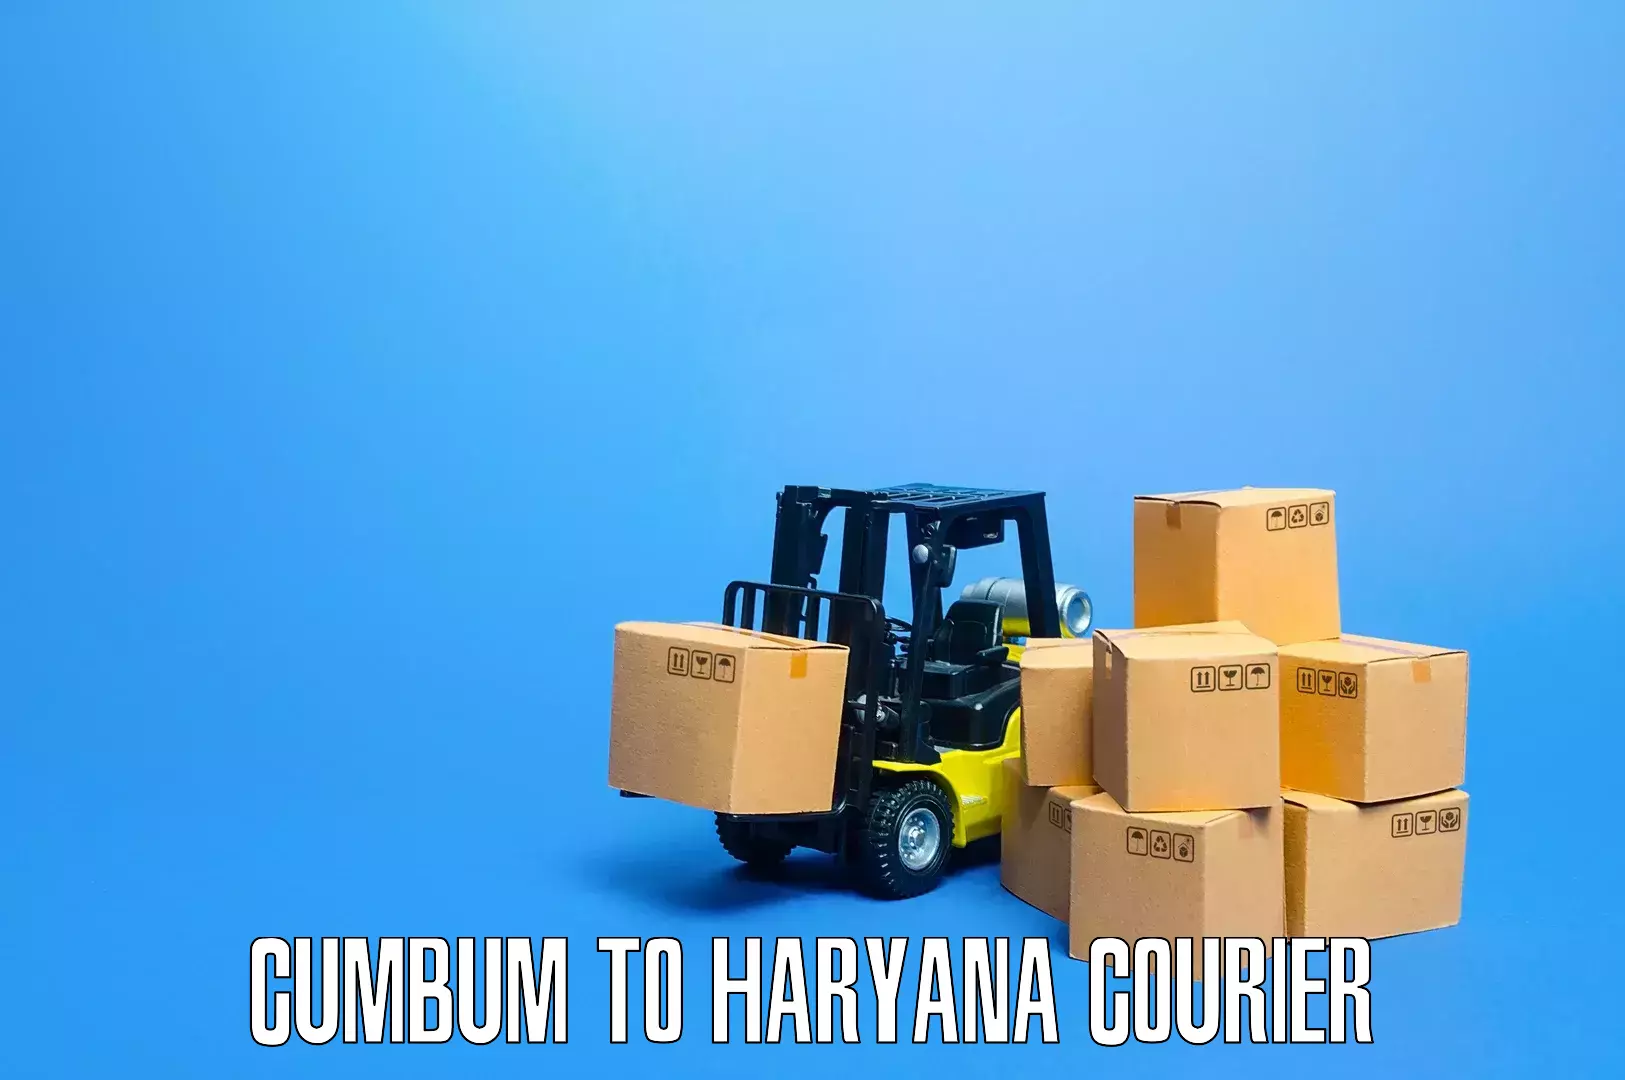 Furniture delivery service Cumbum to Agroha